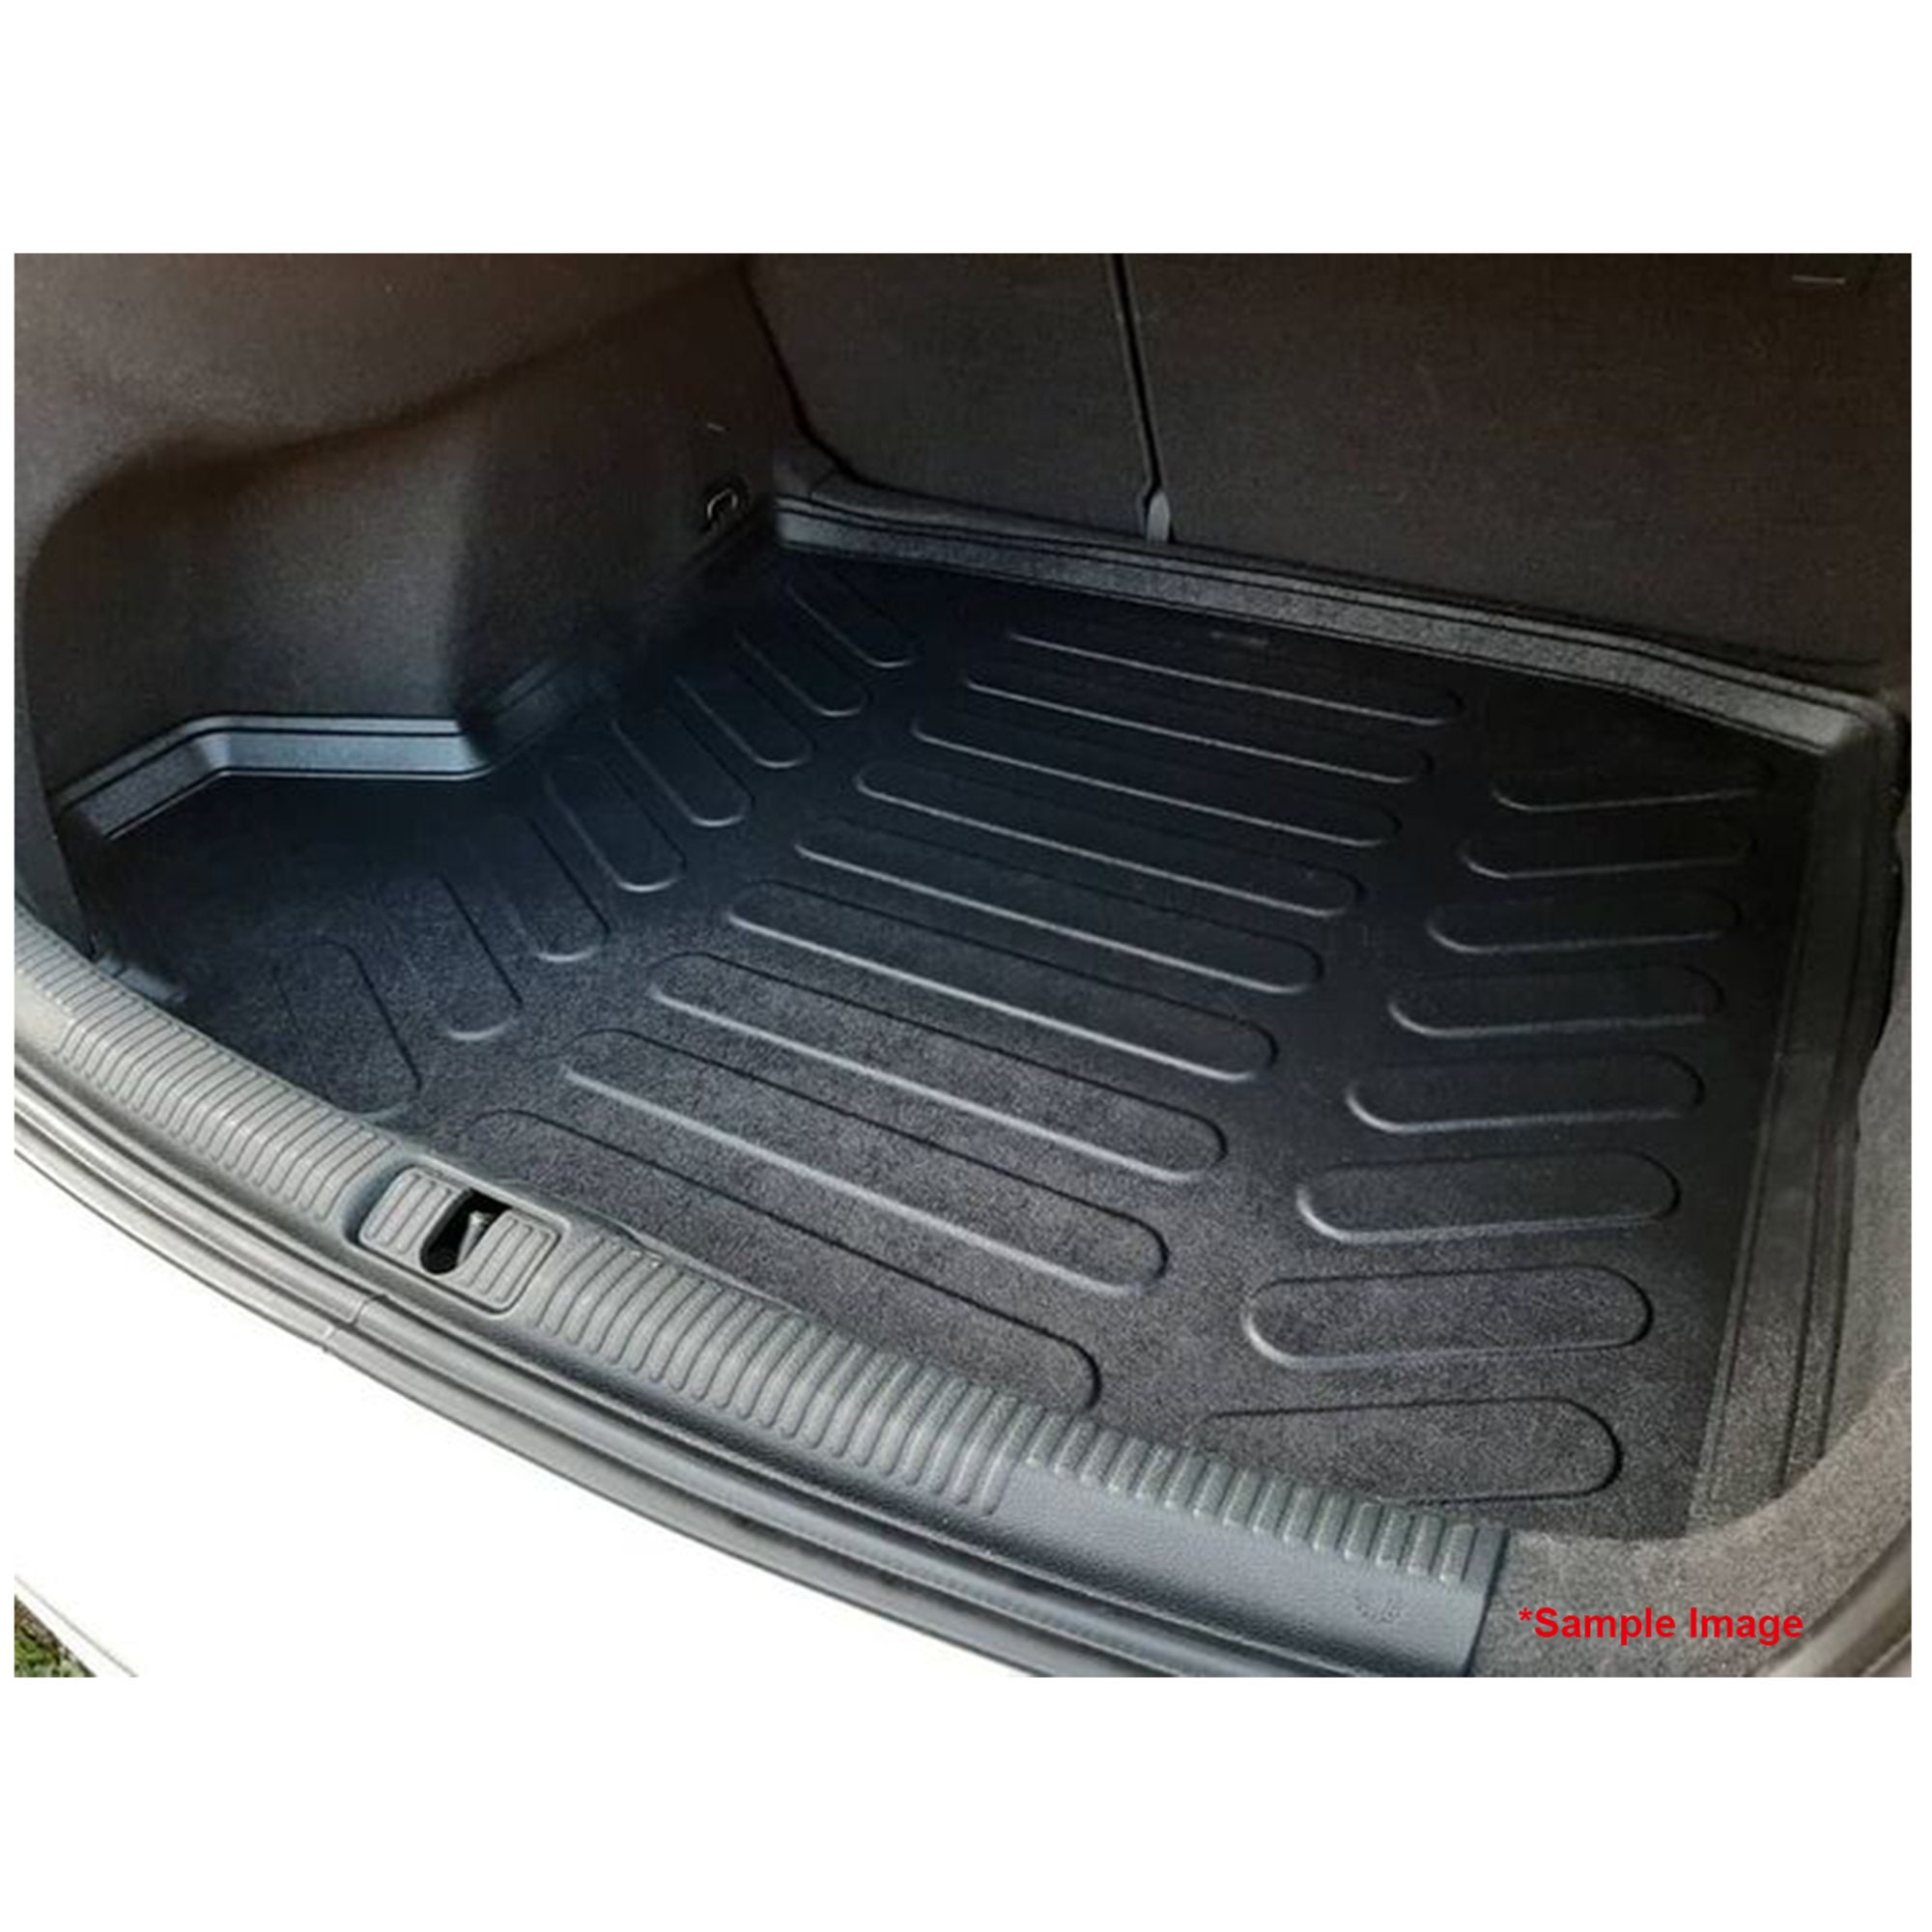 Fits Volkswagen Passat B8 Variant 2015-2019 All Protection Cargo Liner Trunk  Mat Fresh Design Heavy Duty Trimmable Trunk Liner -  Israel